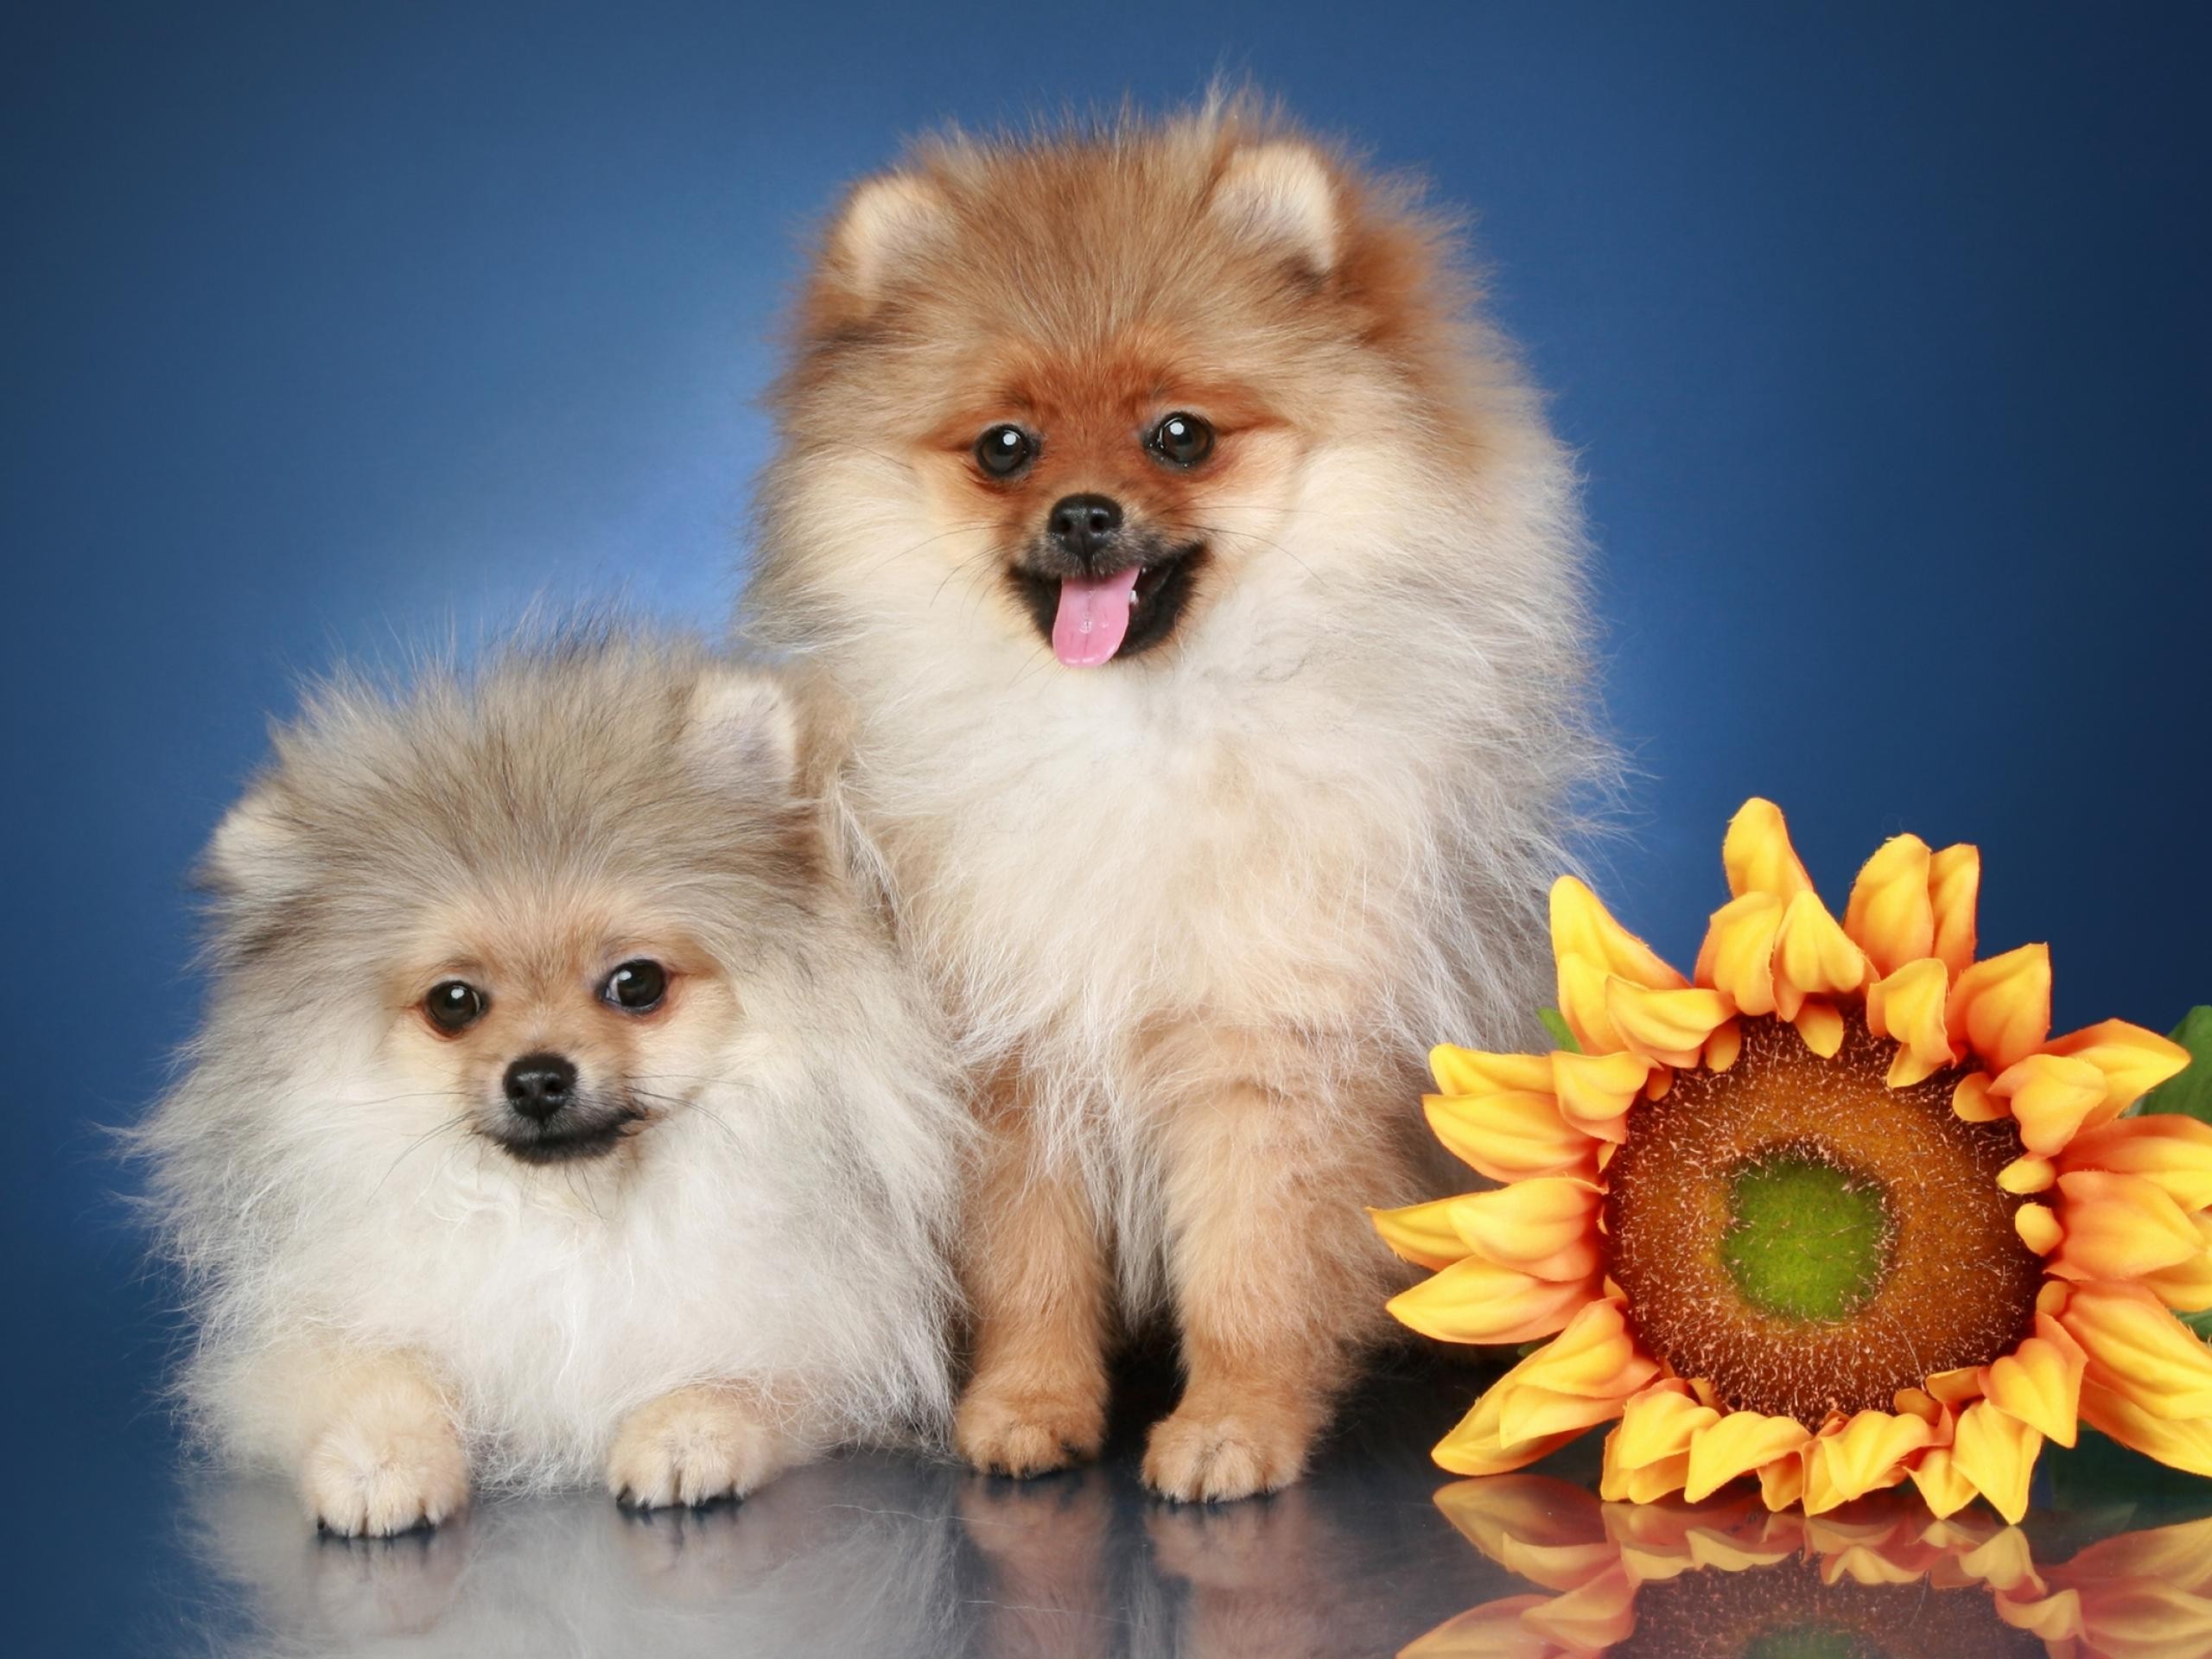 Rate Select Rating Give Cute Pomeranians